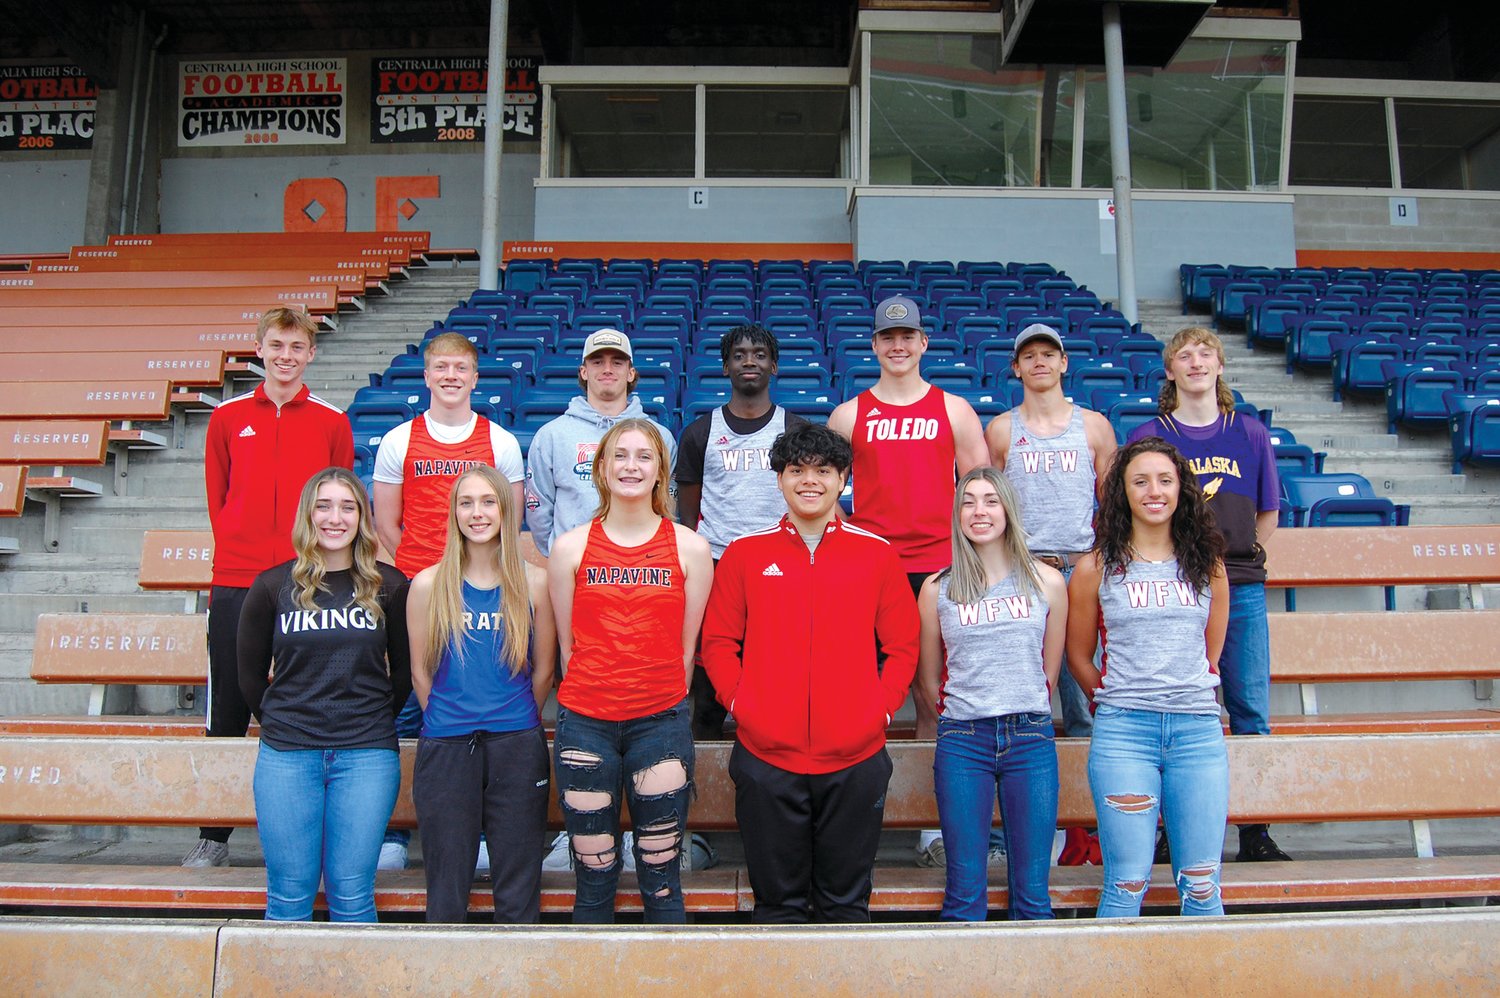 Members of the 2022 Lewis County All-Area Track and Field team pose for a photo at Centralia High School’s Tiger Stadium. Athletes pictured in the front row, from left: Caelyn Marshall, Reagan Nallion, Keira O’Neill, Joshhill Tilton, Sadie Dahlin and Savanna Bolivar. In the back row, from left: Connor Olmstead, Lucas Dahl, Talon Betts, Brian Anouma, Carson Olmstead, Elijah Annonen and Kole Taylor. Not pictured: Matt Cooper, Devin Harrison, Carter Phelps, Isaac Ramirez, Seth Hoff, Jordan Koetje, Elaina Koenig, Charlie Carper, Emily Weddle, Addison Hall and Cali Scofield.